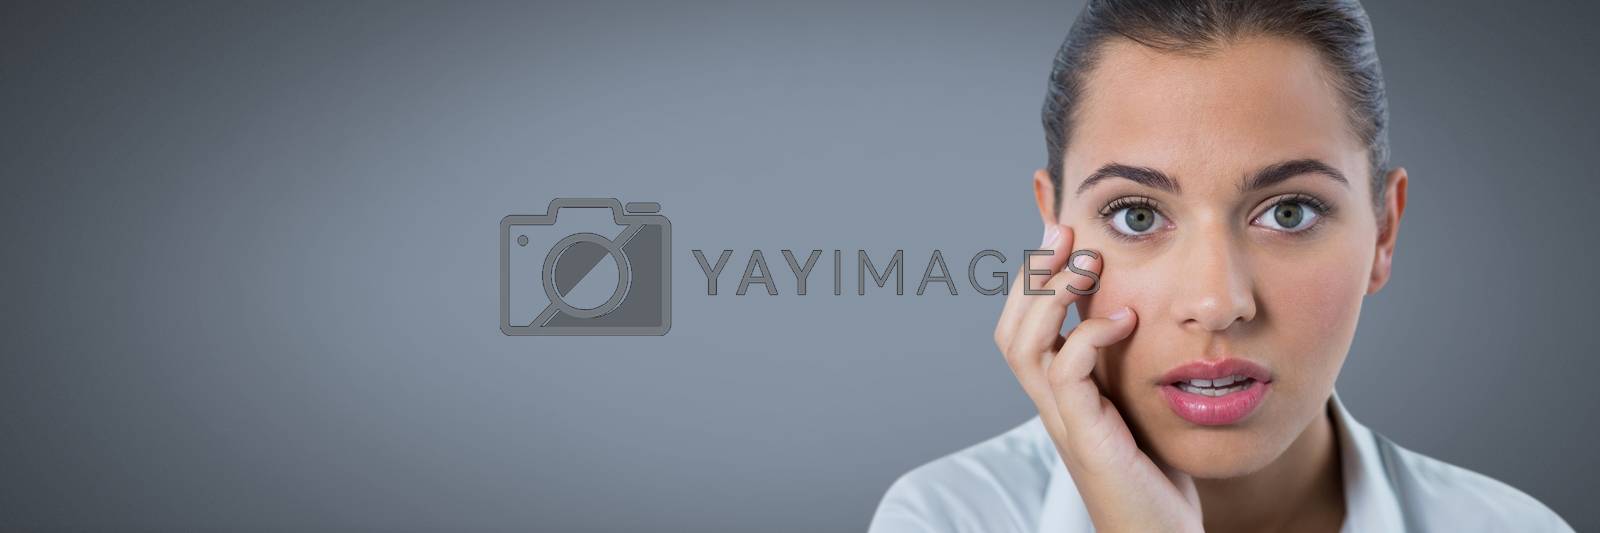 Royalty free image of Businesswoman thinking attentively with grey background by Wavebreakmedia